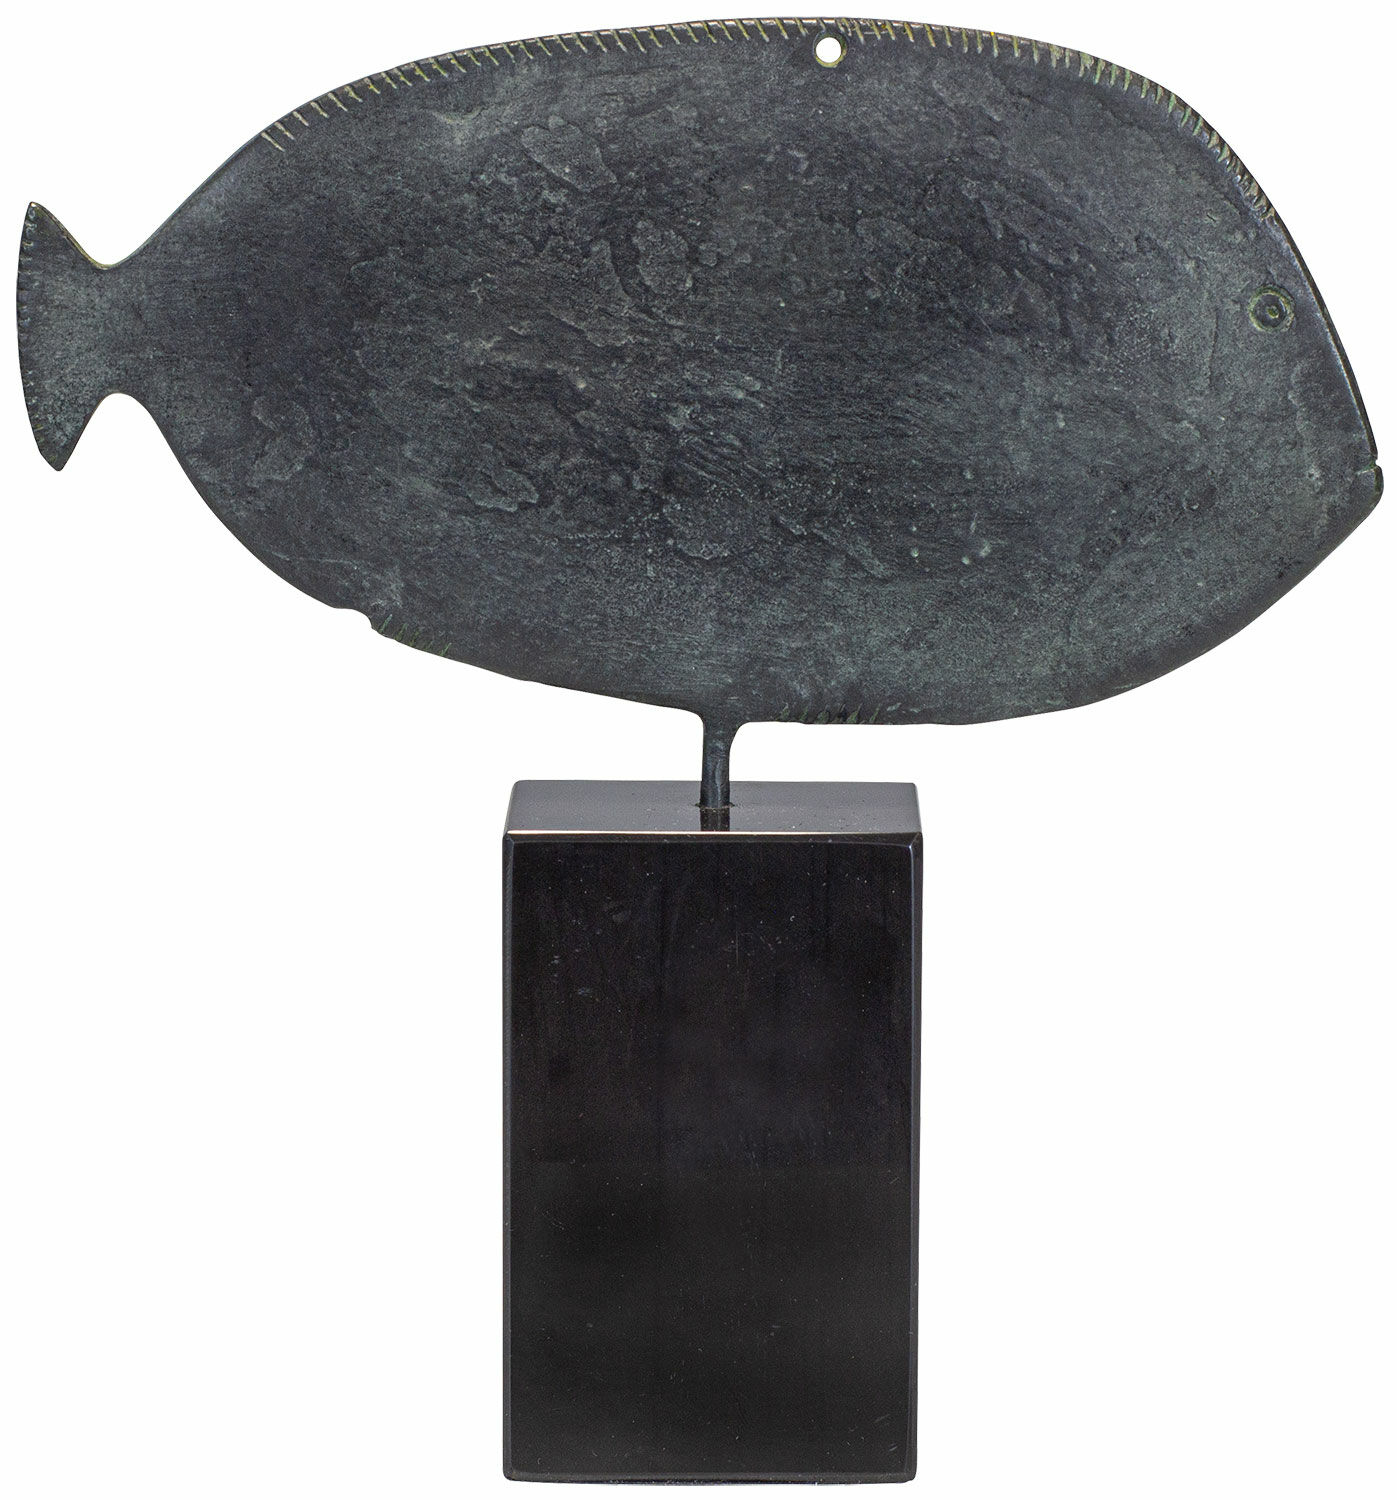 Sculpture "Egyptian Palette in the Shape of a Fish", bronze